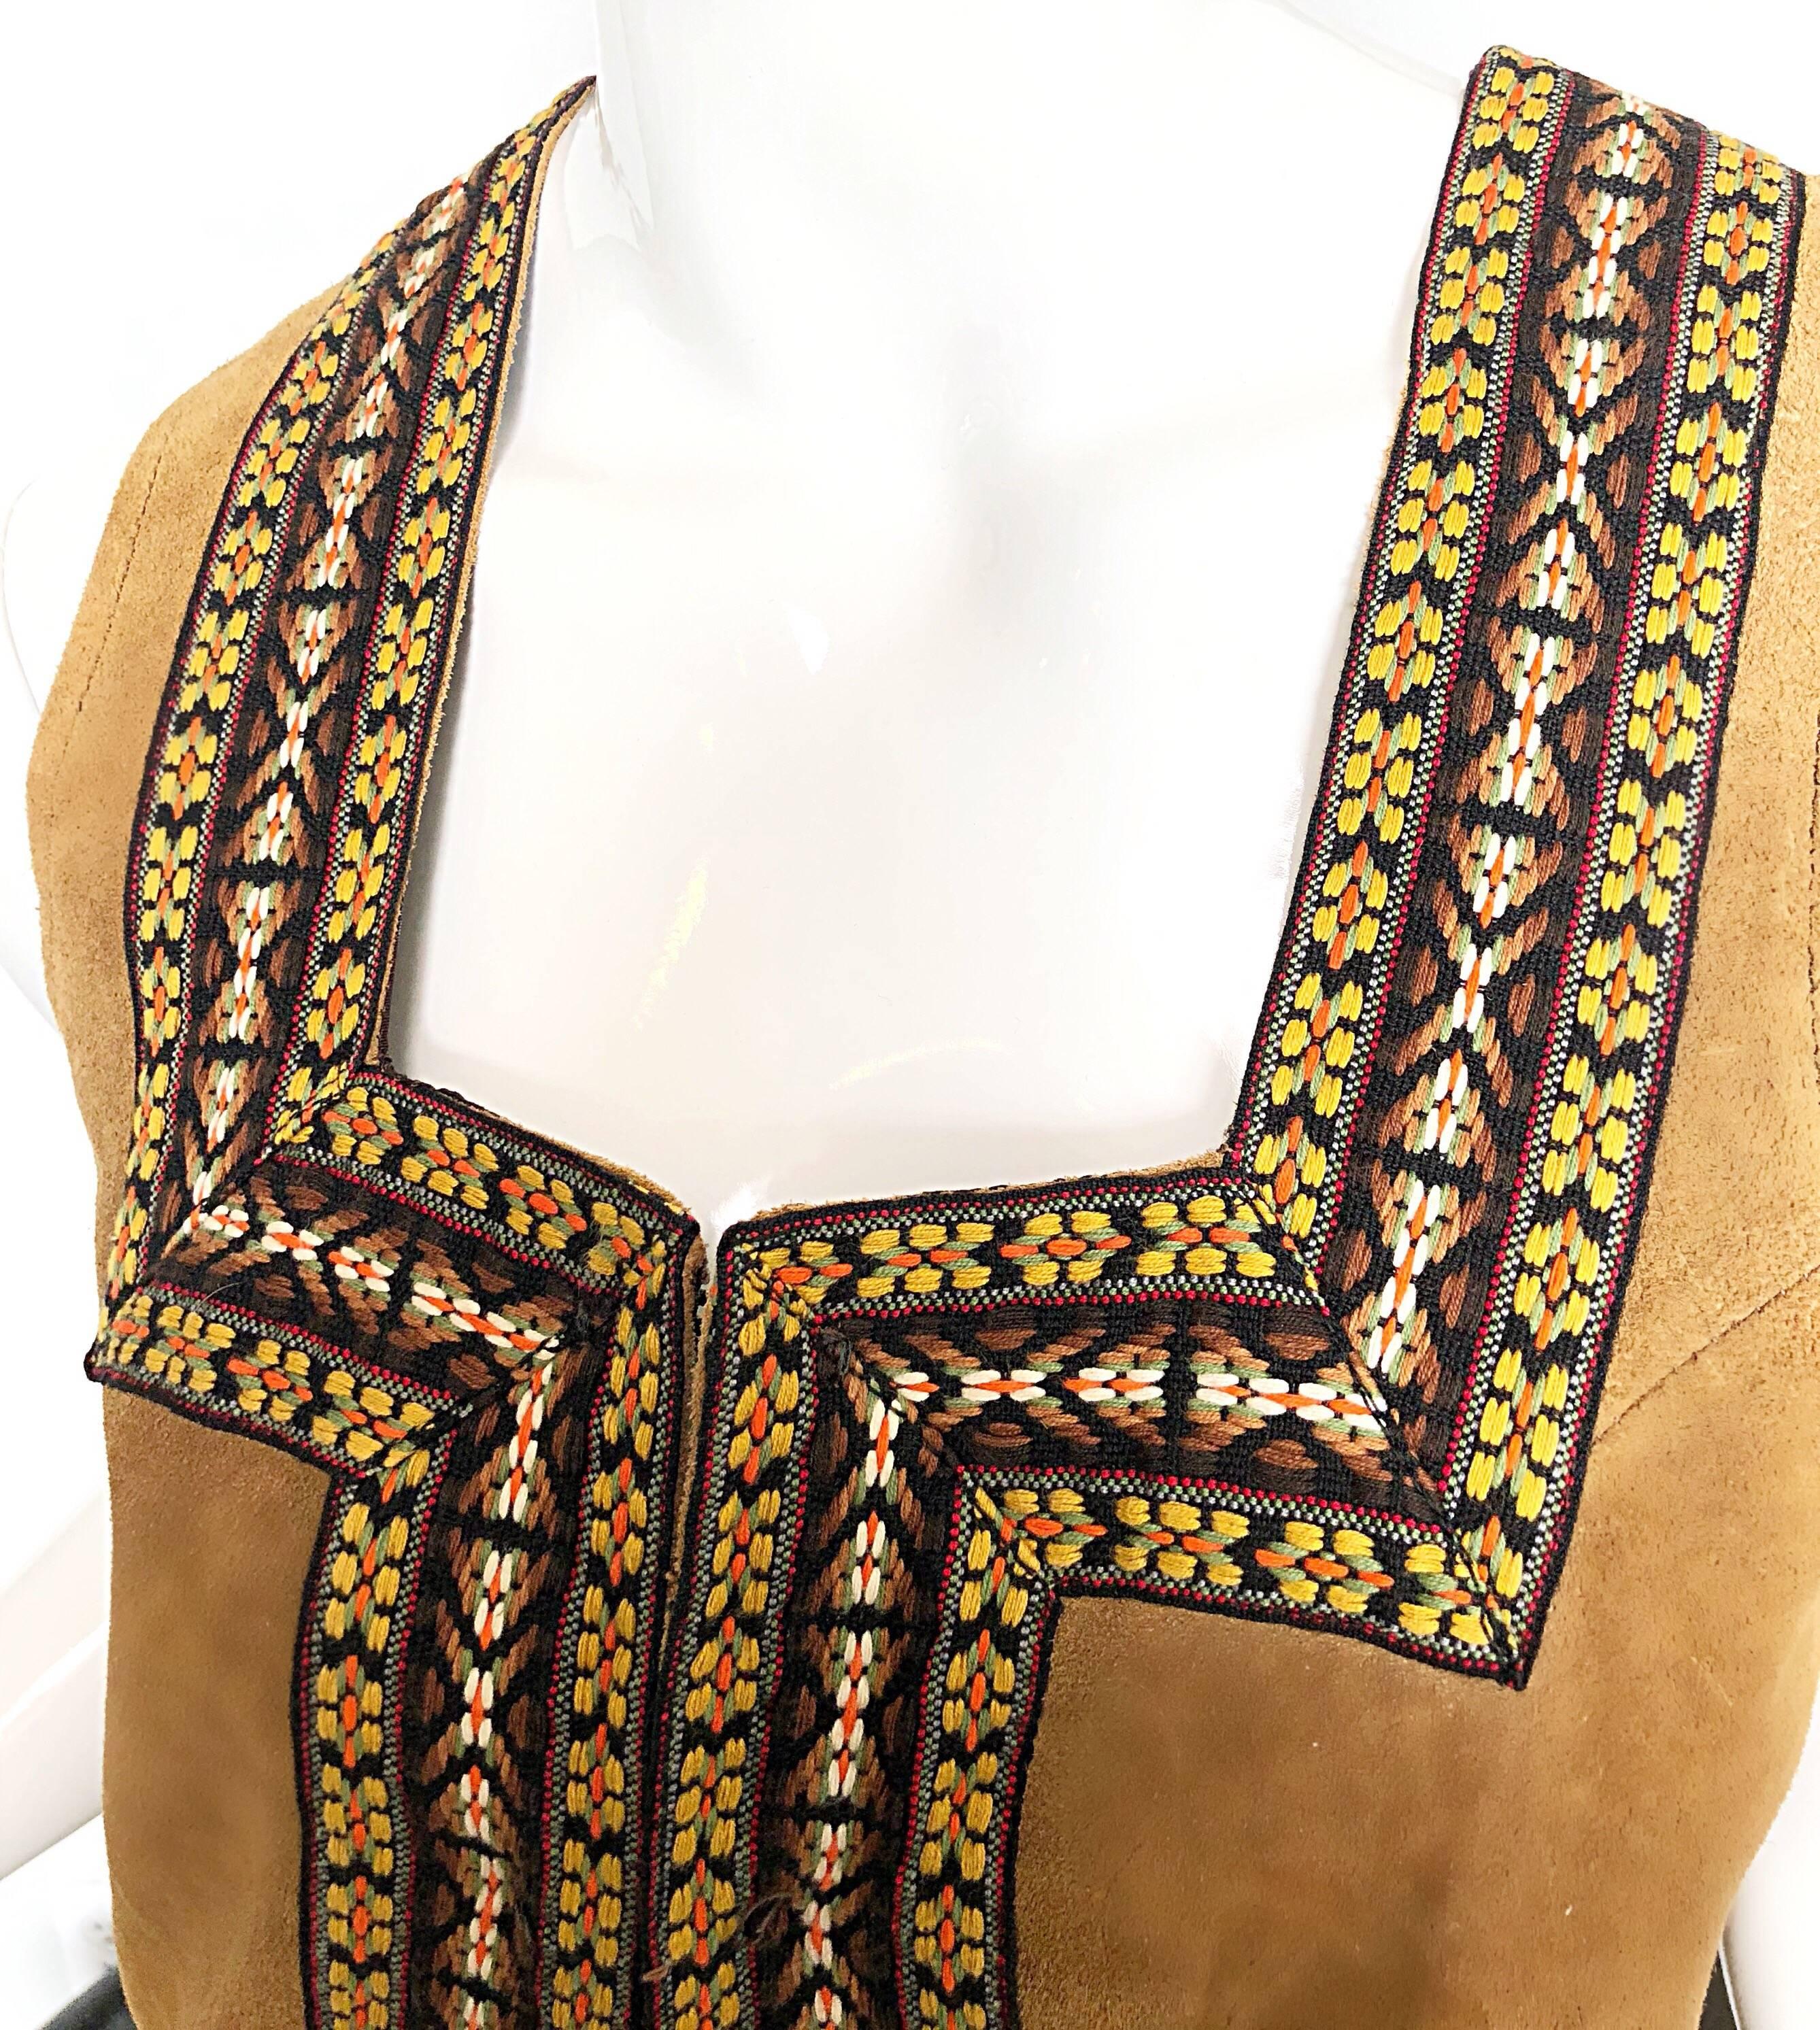 Chic 1970s Tan Suede Leather Embroidered 70s Vintage Boho Sleeveless Vest Jacket For Sale 1